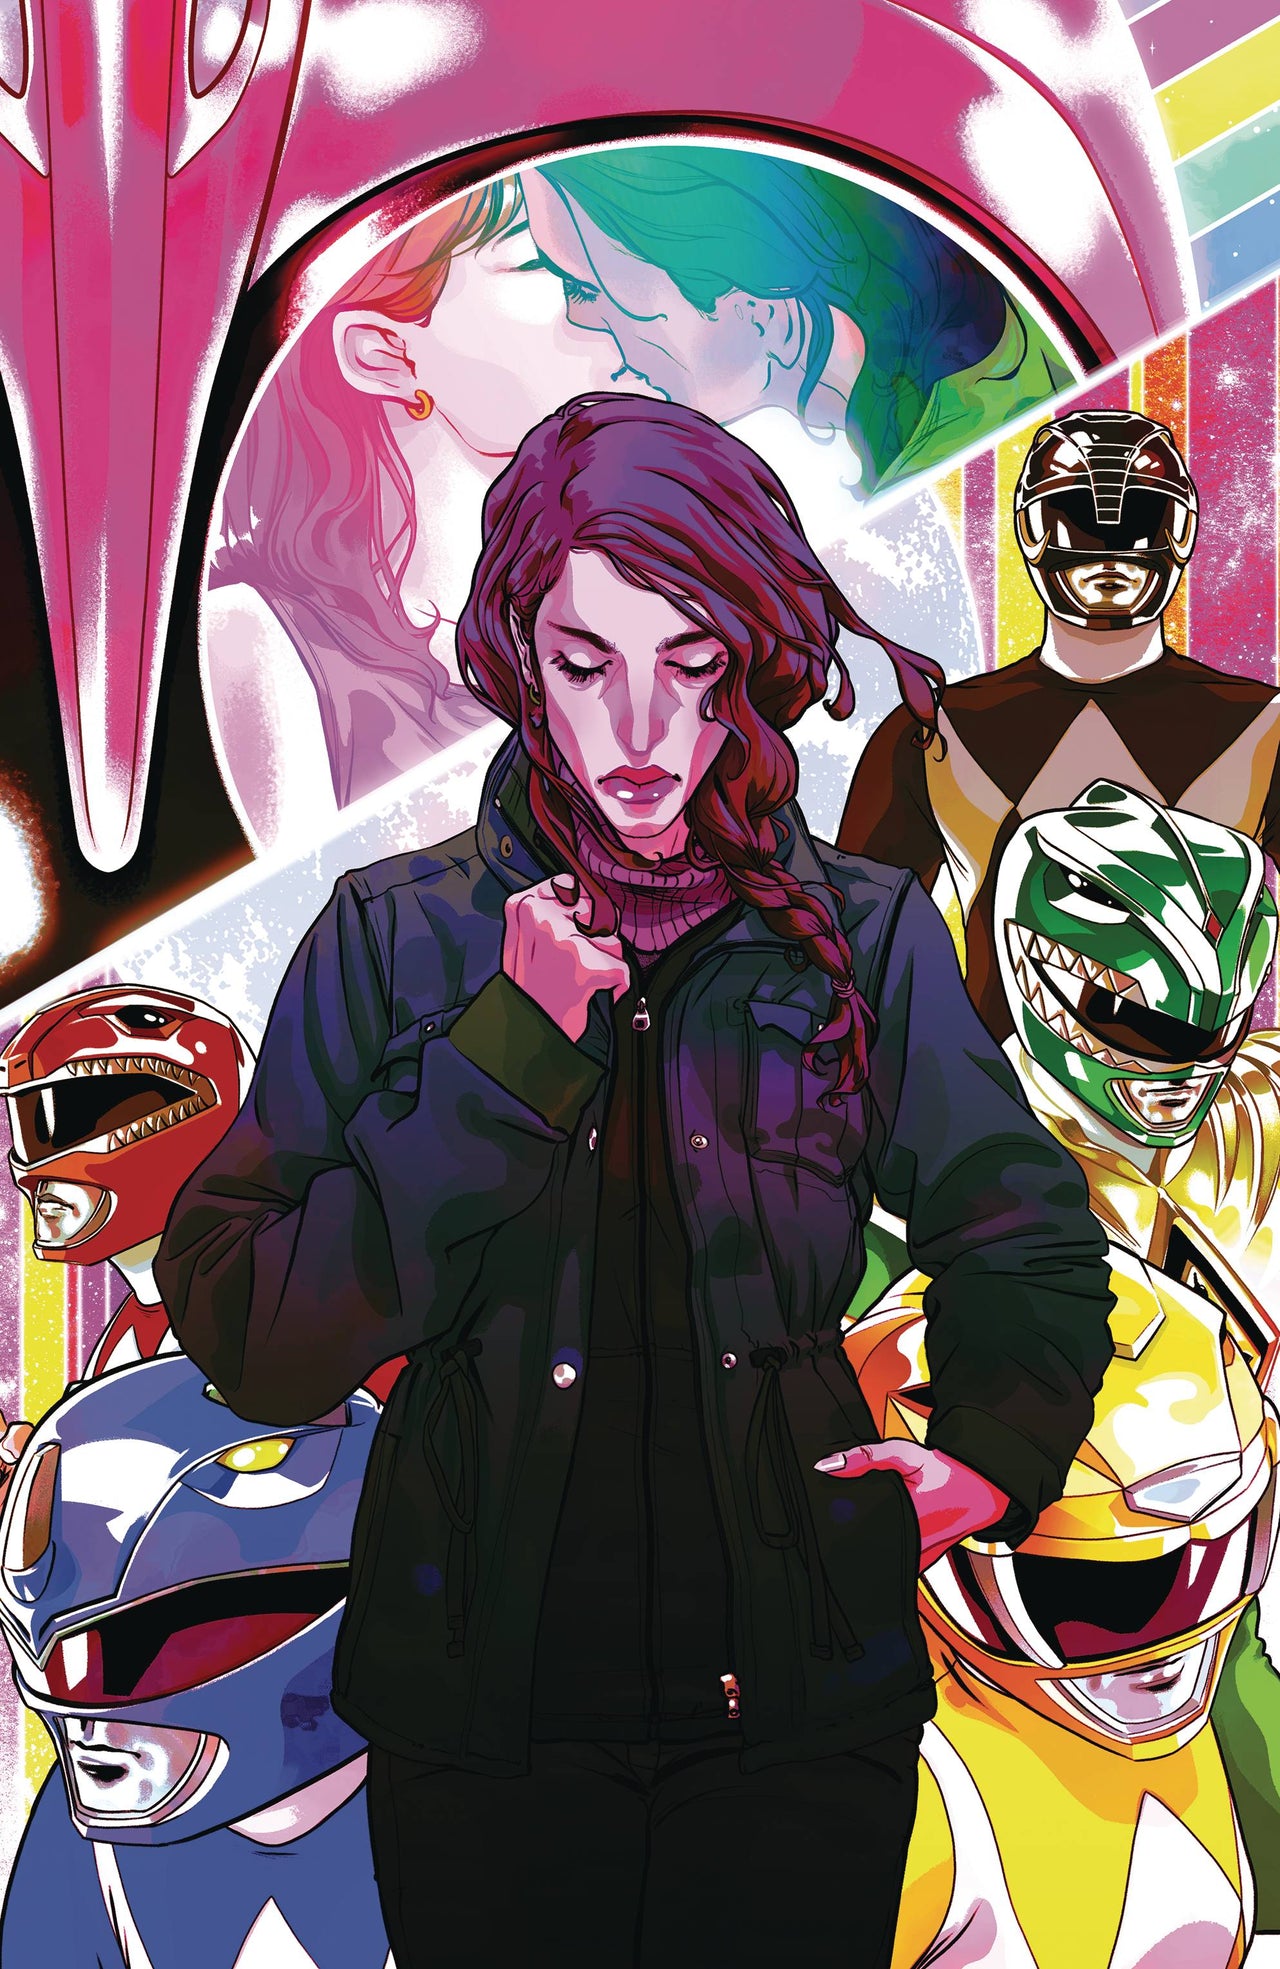 Mighty Morphin Power Rangers: The Return #1 Incentive Cover 1:10 Montes